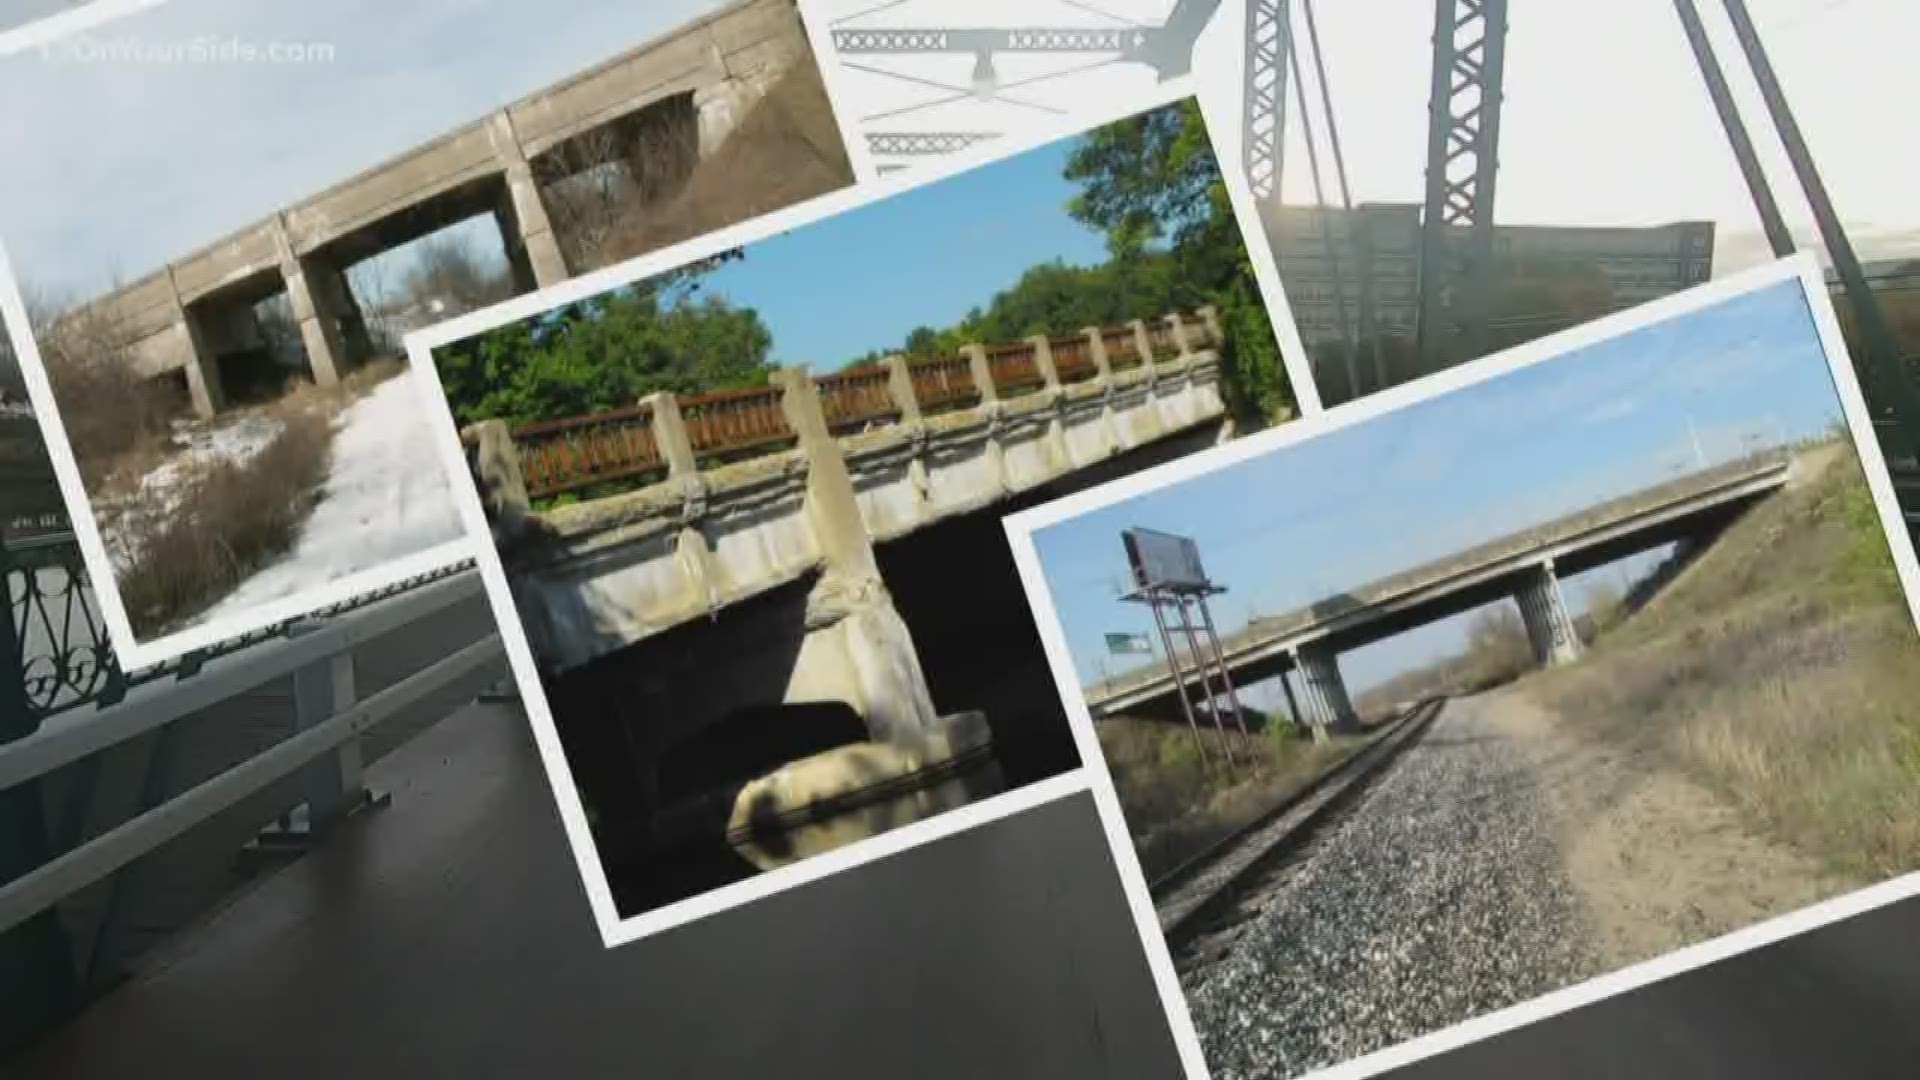 13 ON YOUR SIDE's Sarah Makuta is taking a look at the bridges in West Michigan and trying to figure out, are they as bad as the roads? As bad as we think?